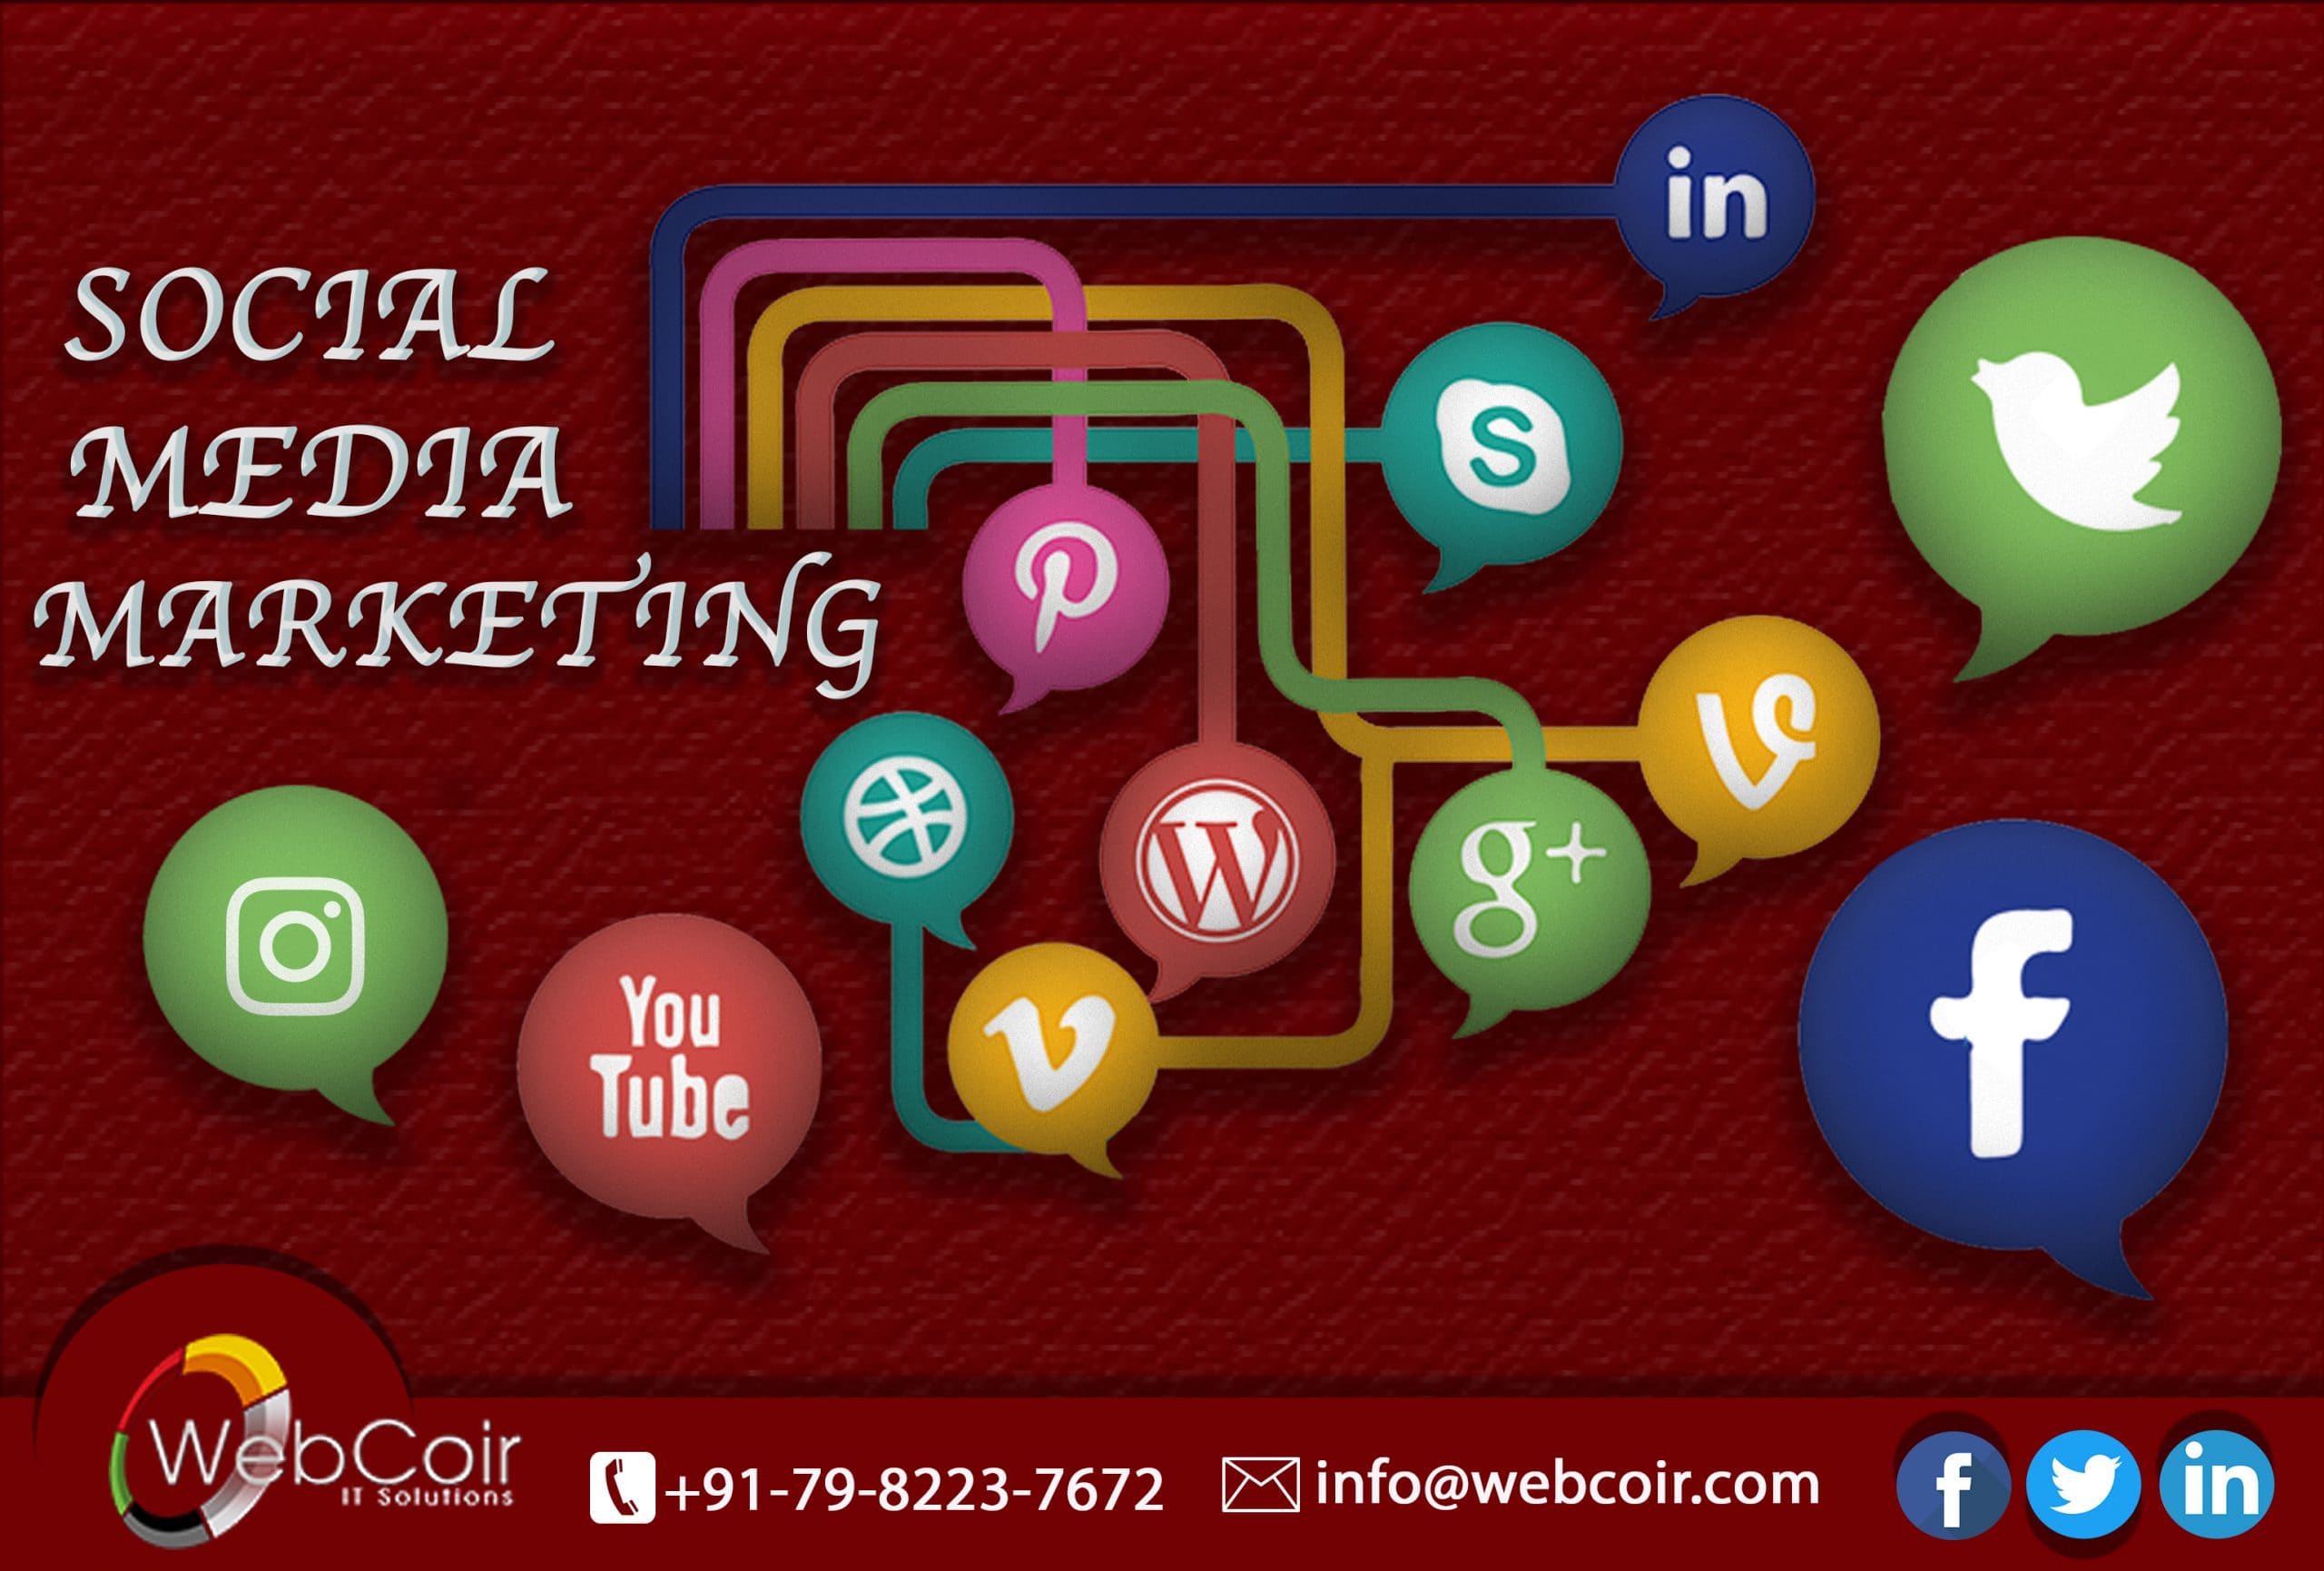 WHAT IS SOCIAL MEDIA MARKETING